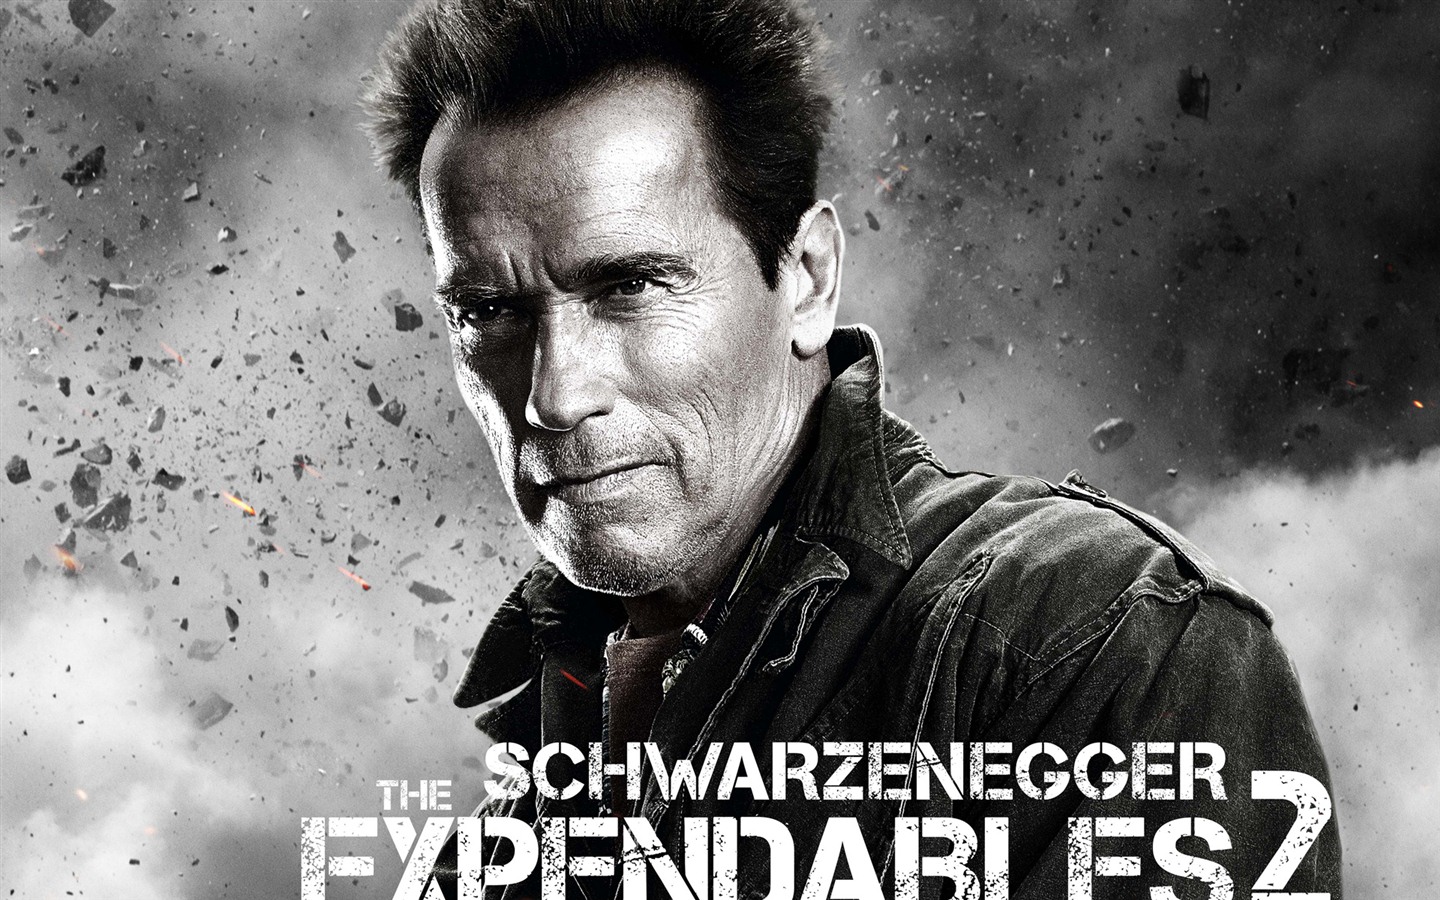 2012 Expendables2 HDの壁紙 #4 - 1440x900